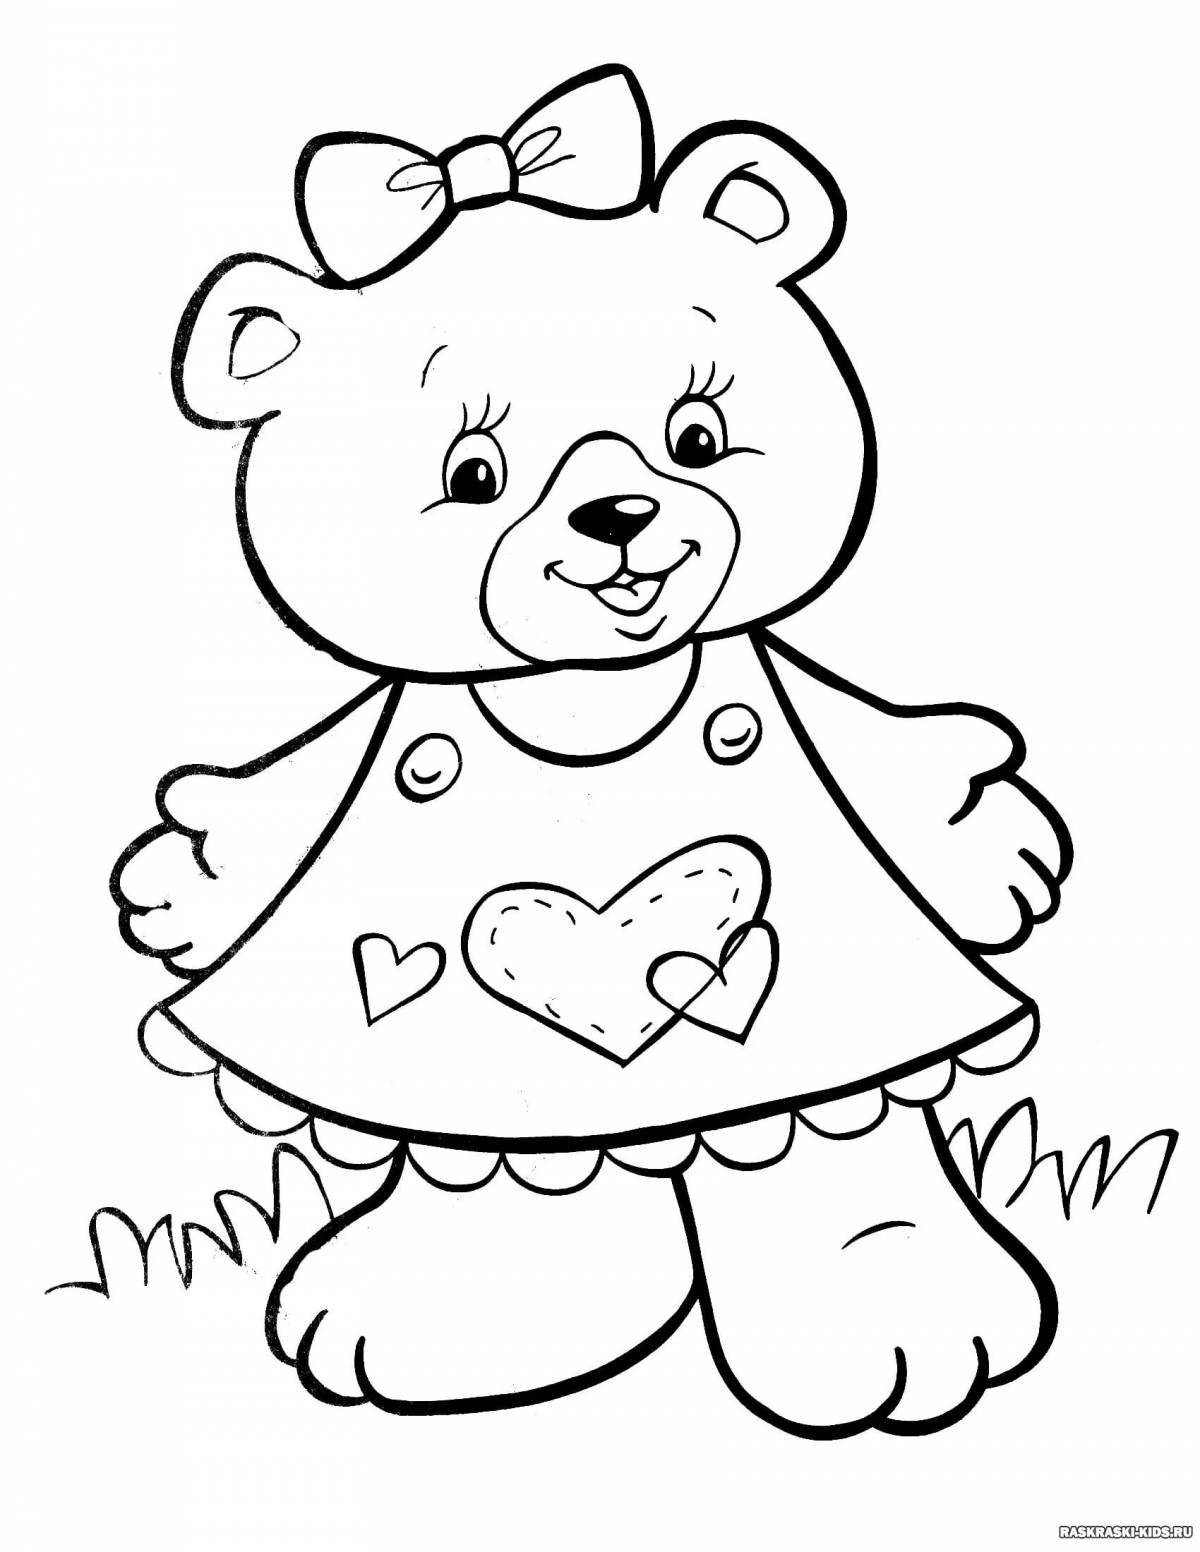 Exquisite teddy bear coloring book for 5-6 year olds